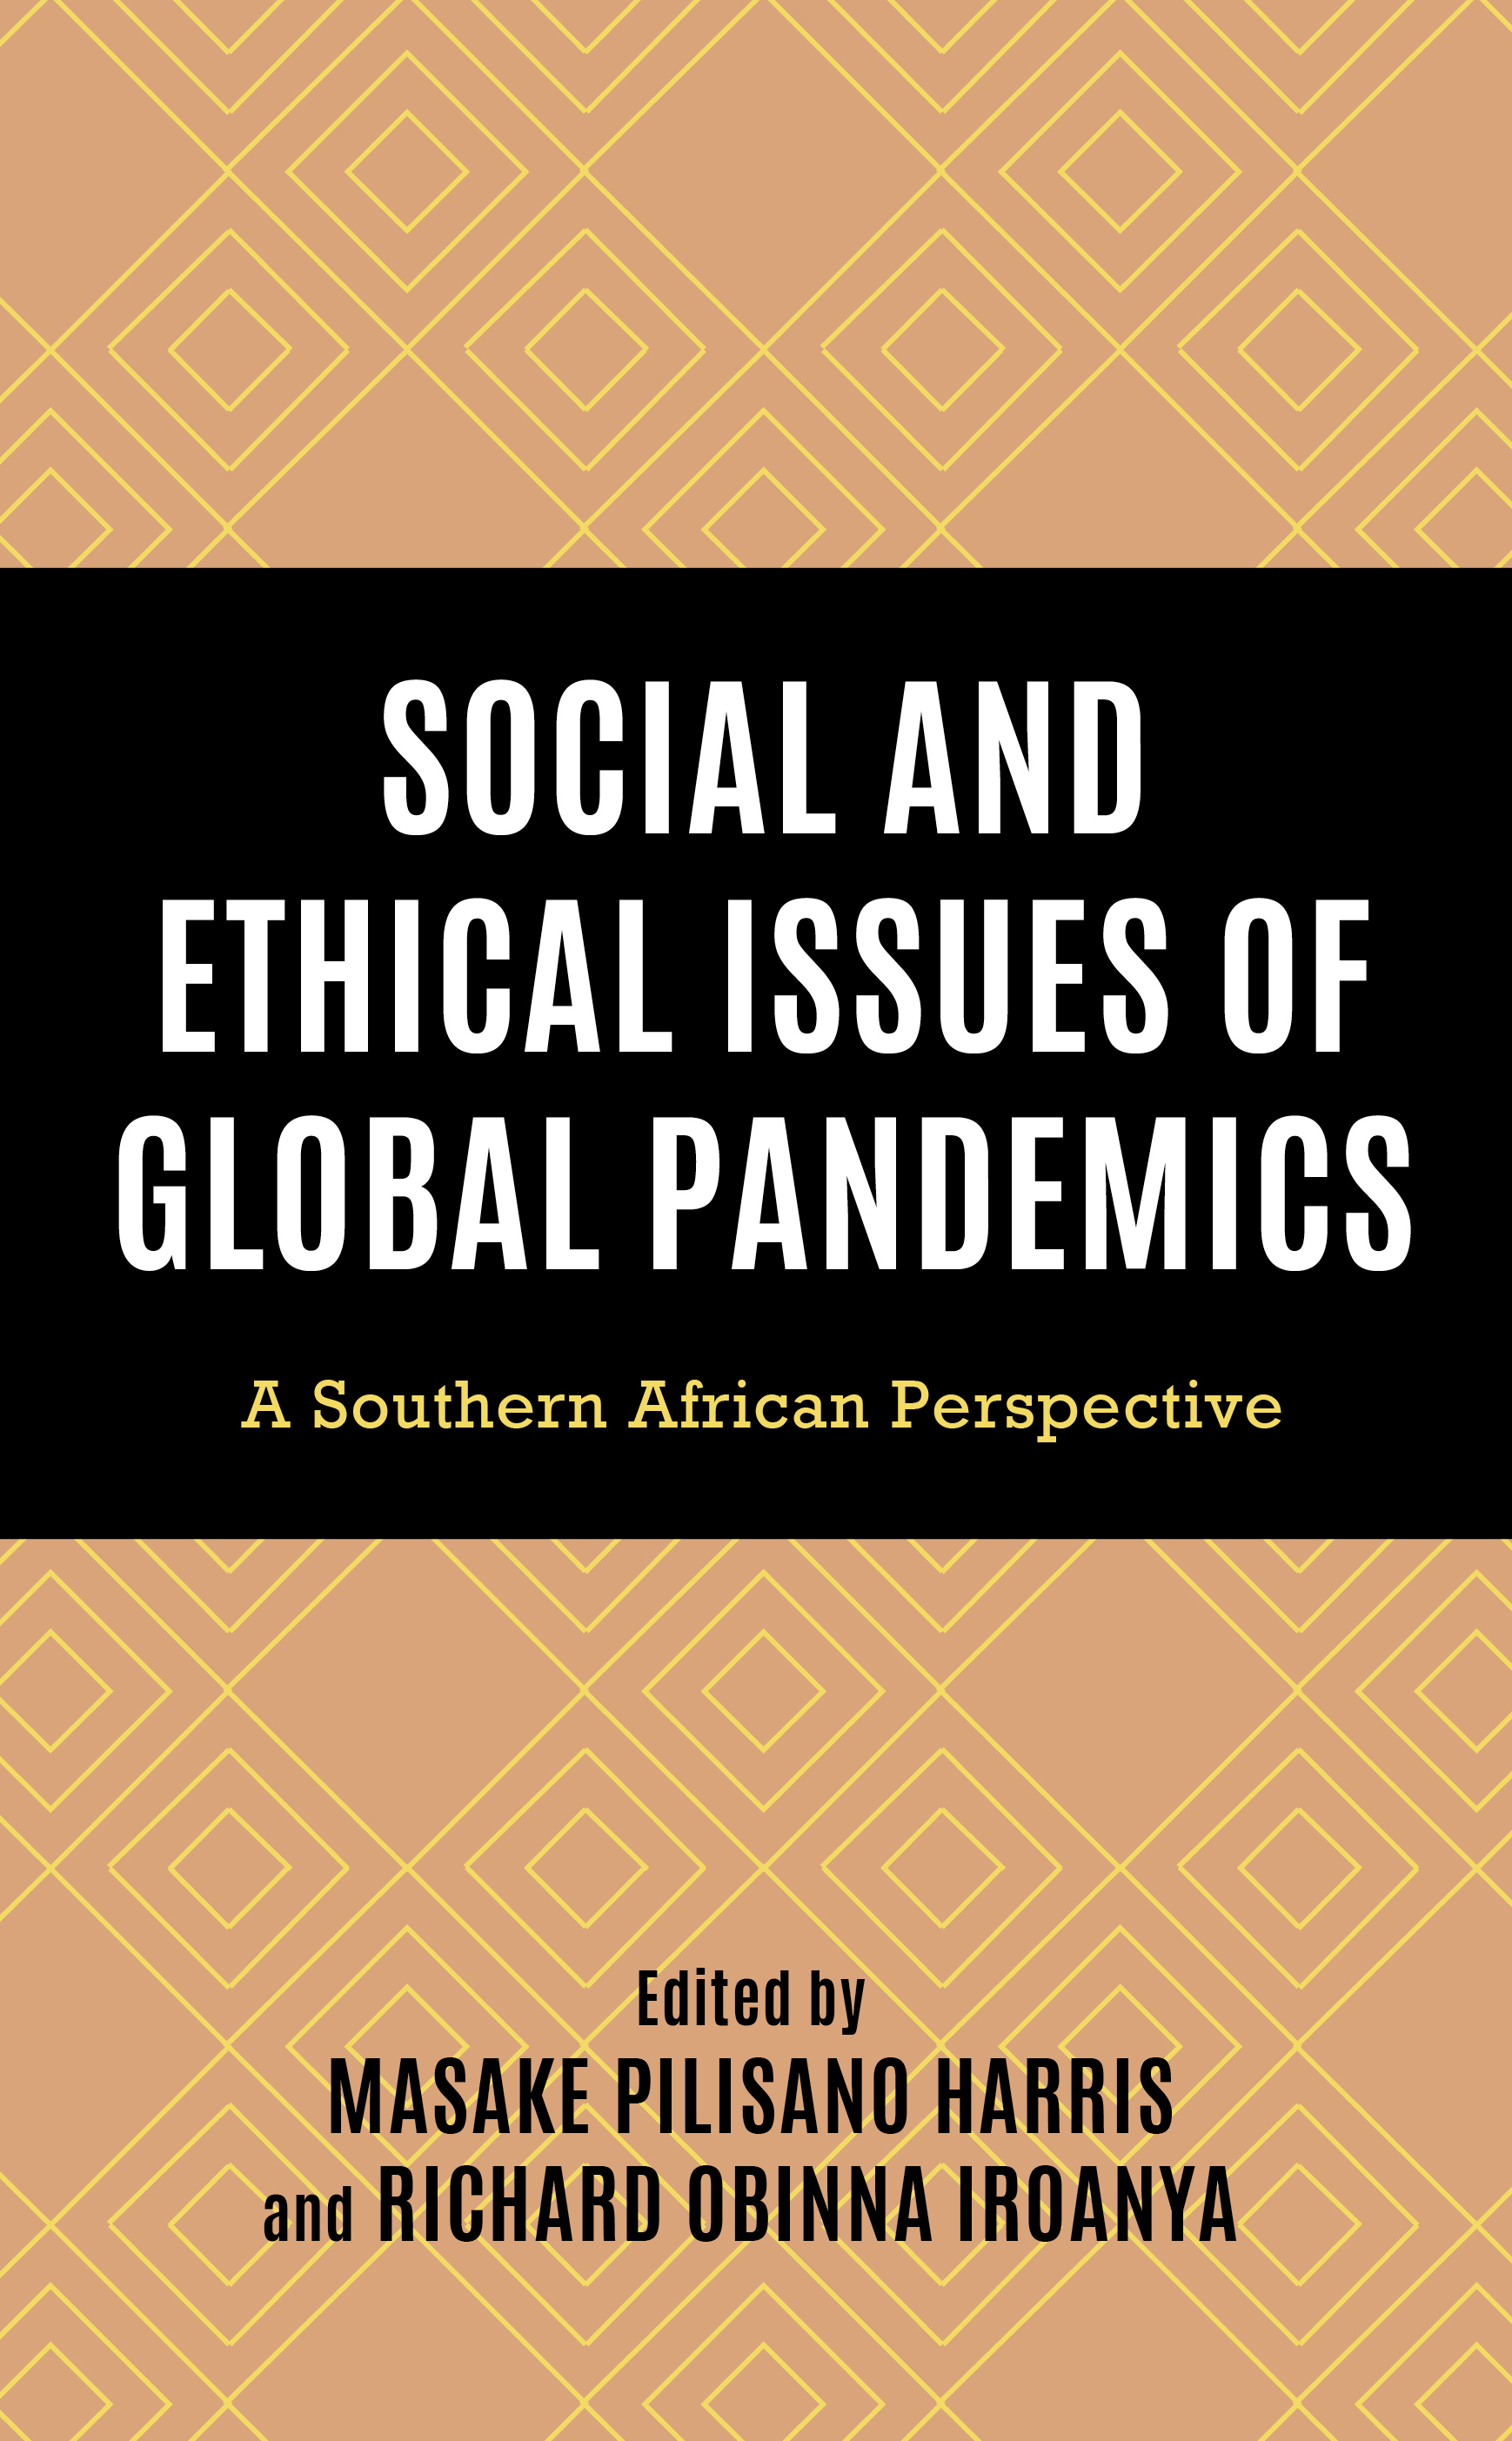 Social and Ethical Issues of Global Pandemics: A Southern African Perspective